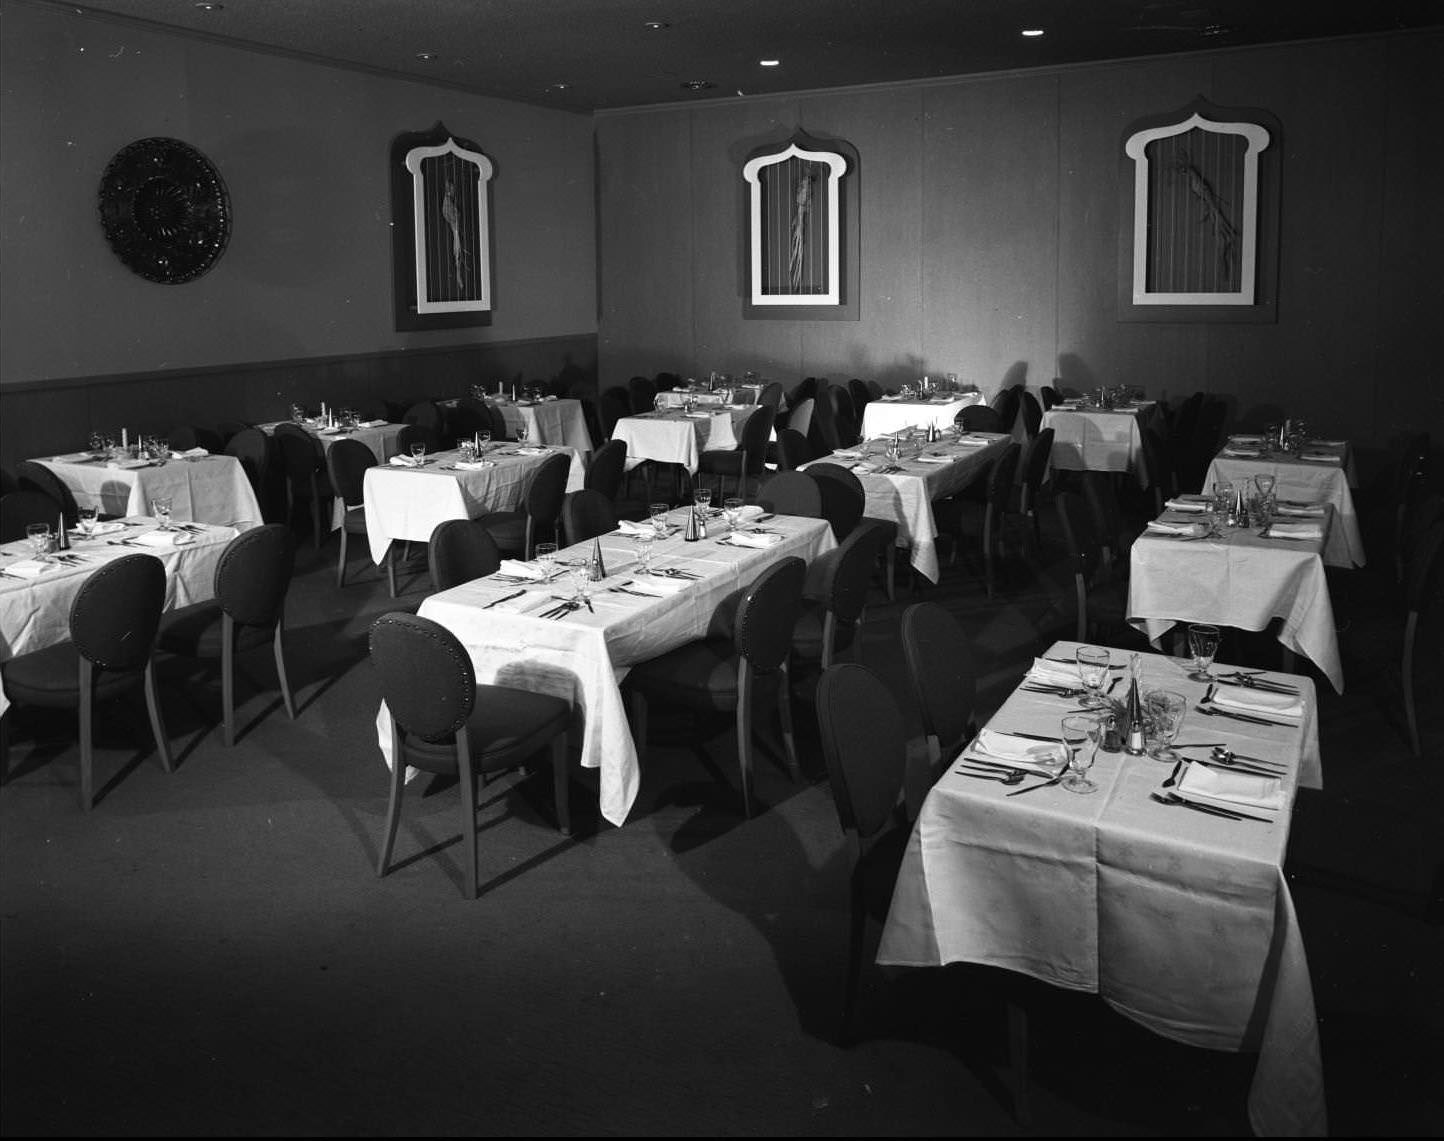 Paradise Room restaurant in the Sands Hotel, 1956. There are tables set for four or five people. There appears to be pictures of birds along the walls.